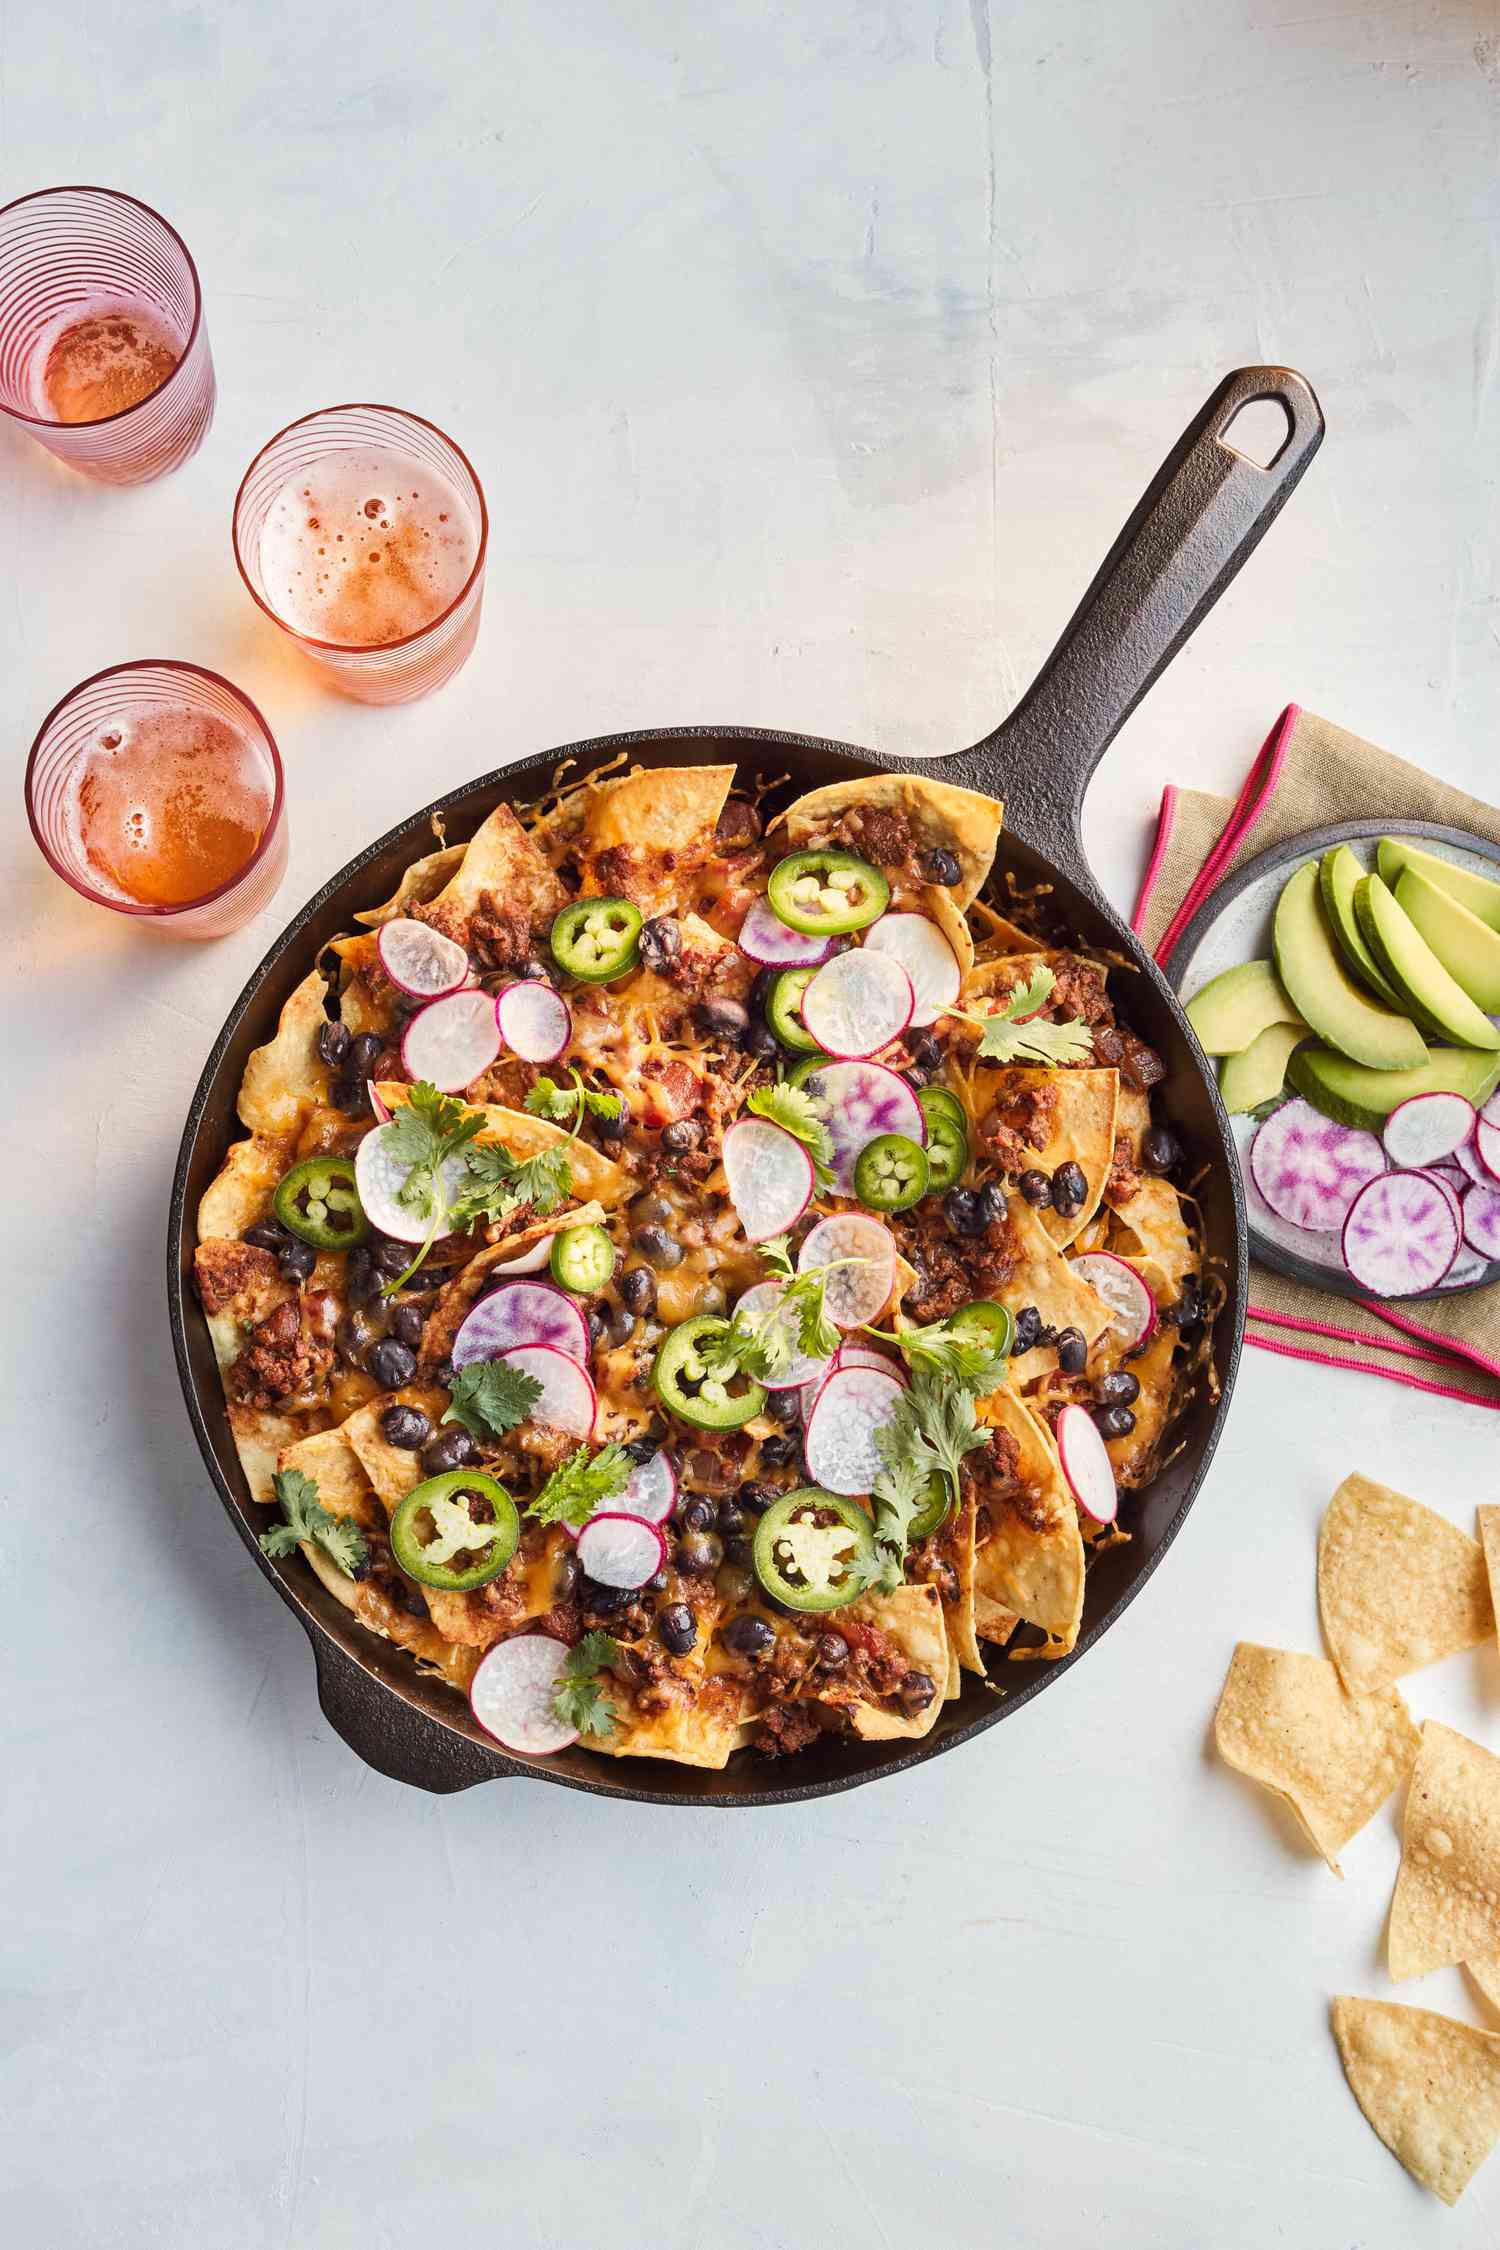 32 Fabulous Recipes You Can Cook in Your Cast-Iron Skillet